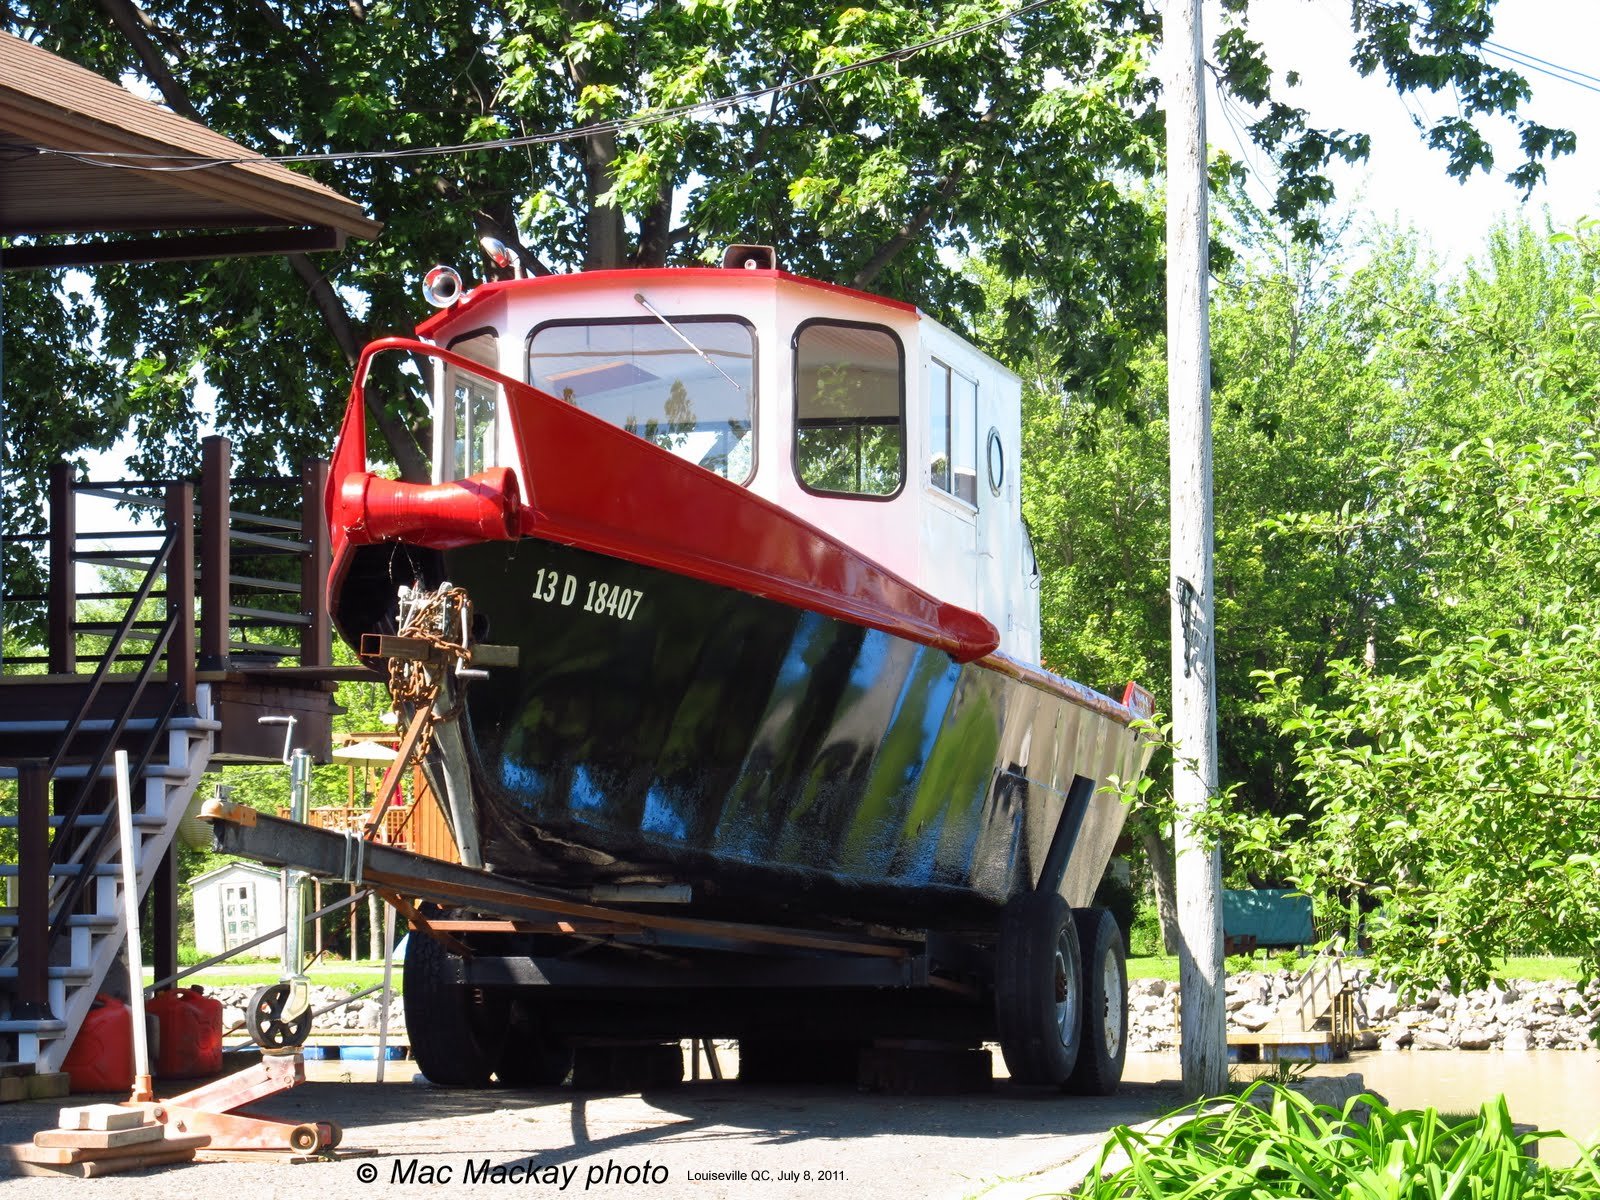 RUSSEL BROTHERS Ltd. Steelcraft winch boat and warping tug builders from  Owen Sound, Ontario.